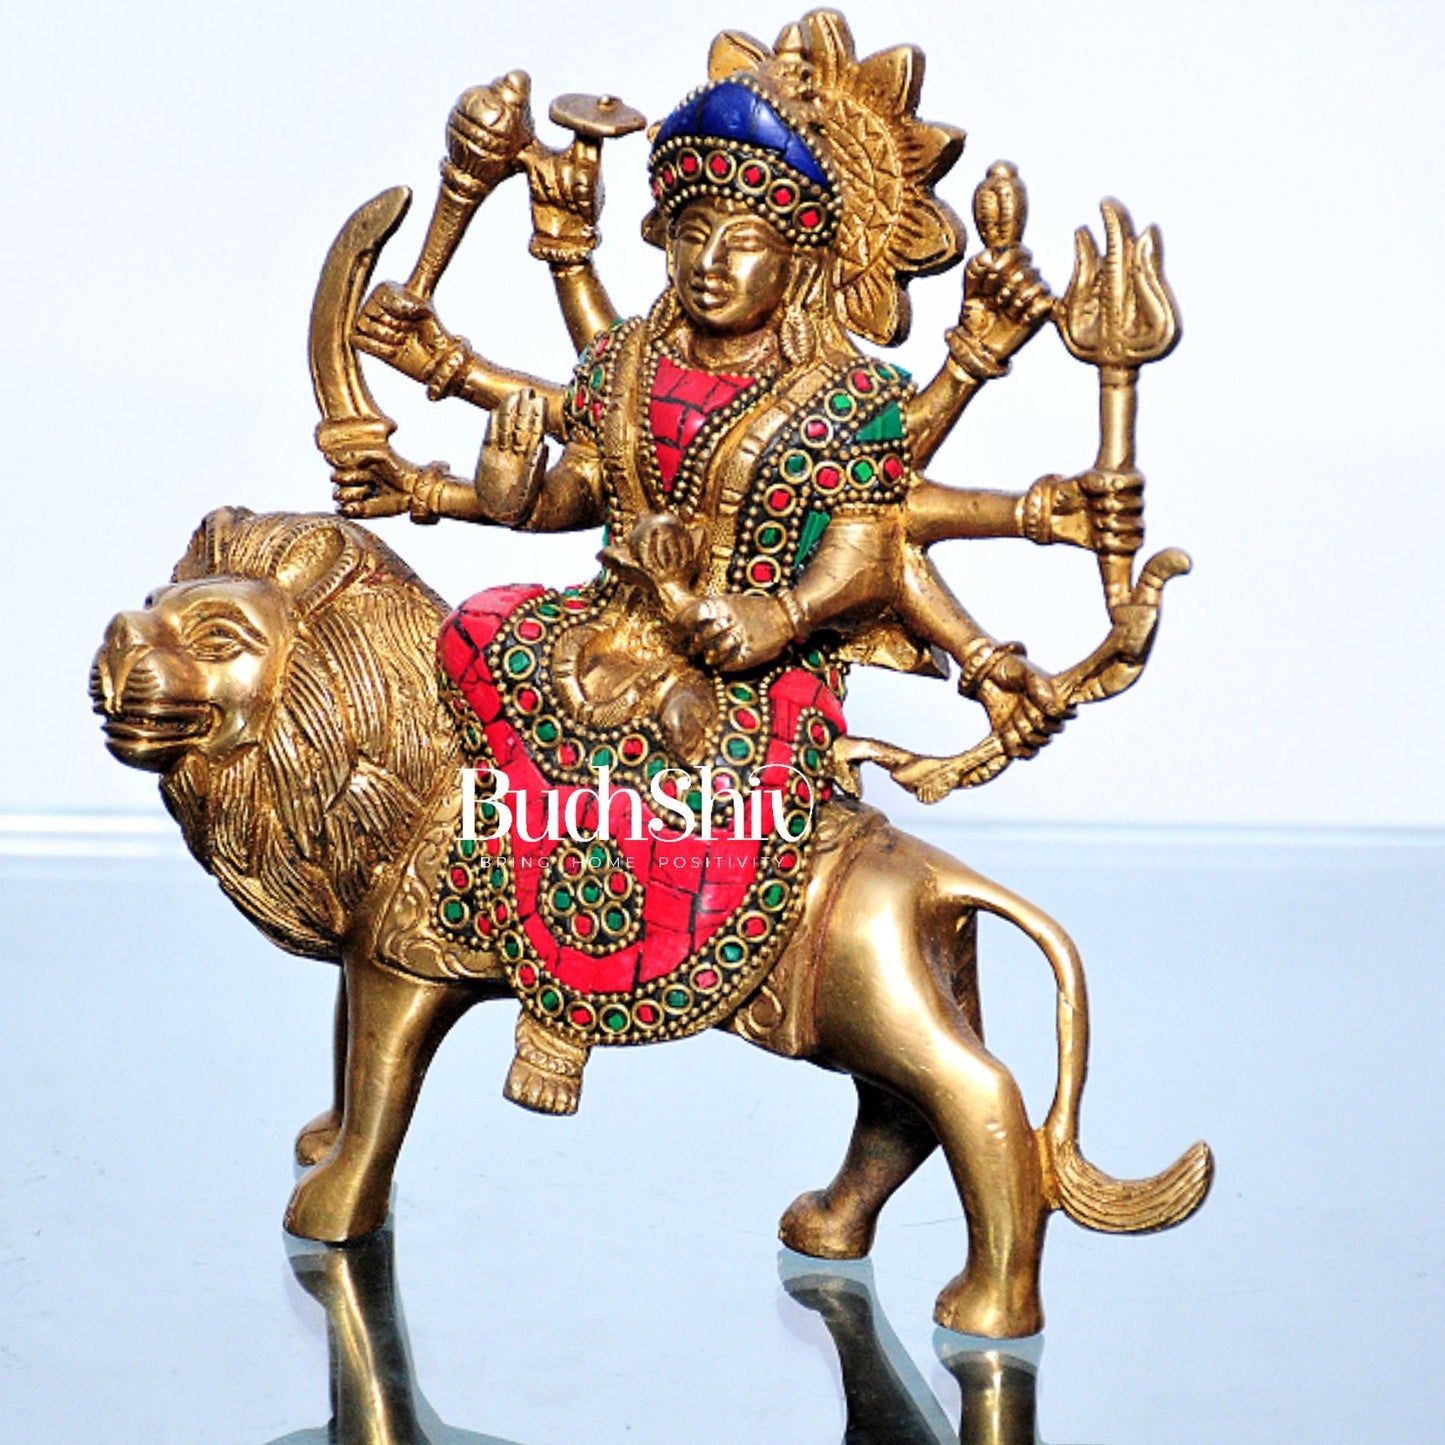 Goddess Durga brass idol with 8 arms sitting on lion with stonework 7.5 inches - Budhshiv.com